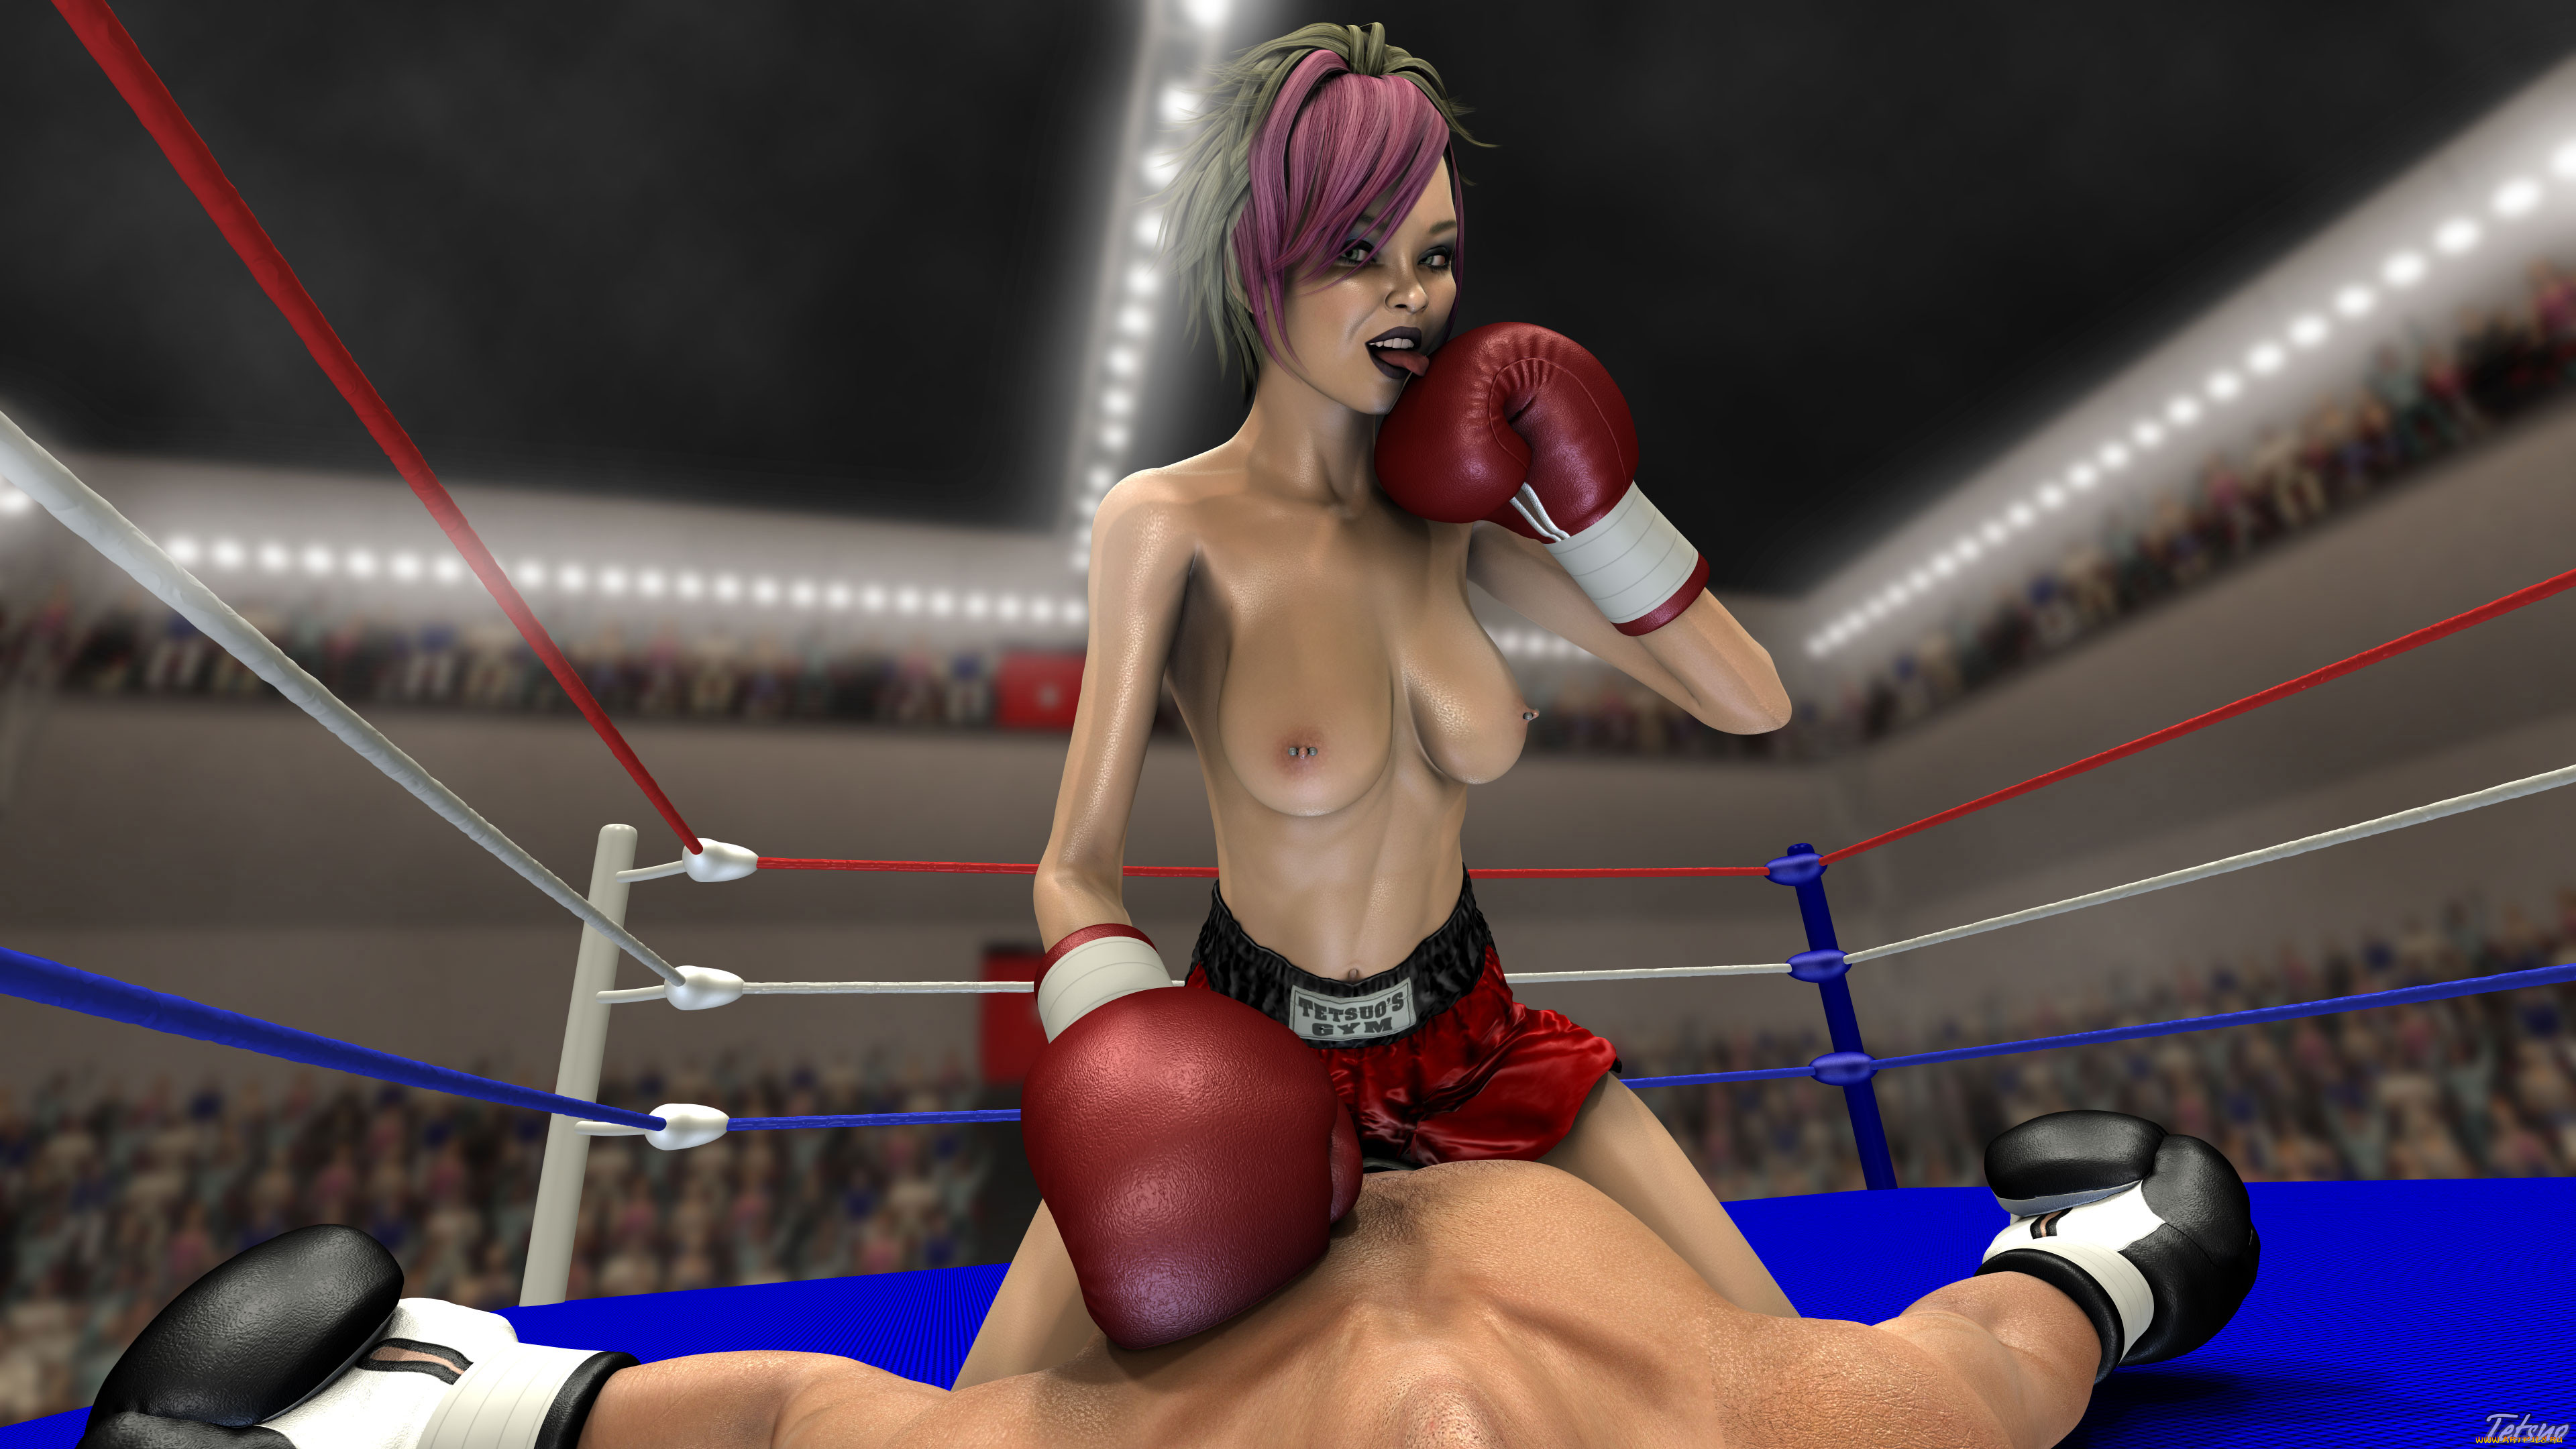 Nude boxing porn